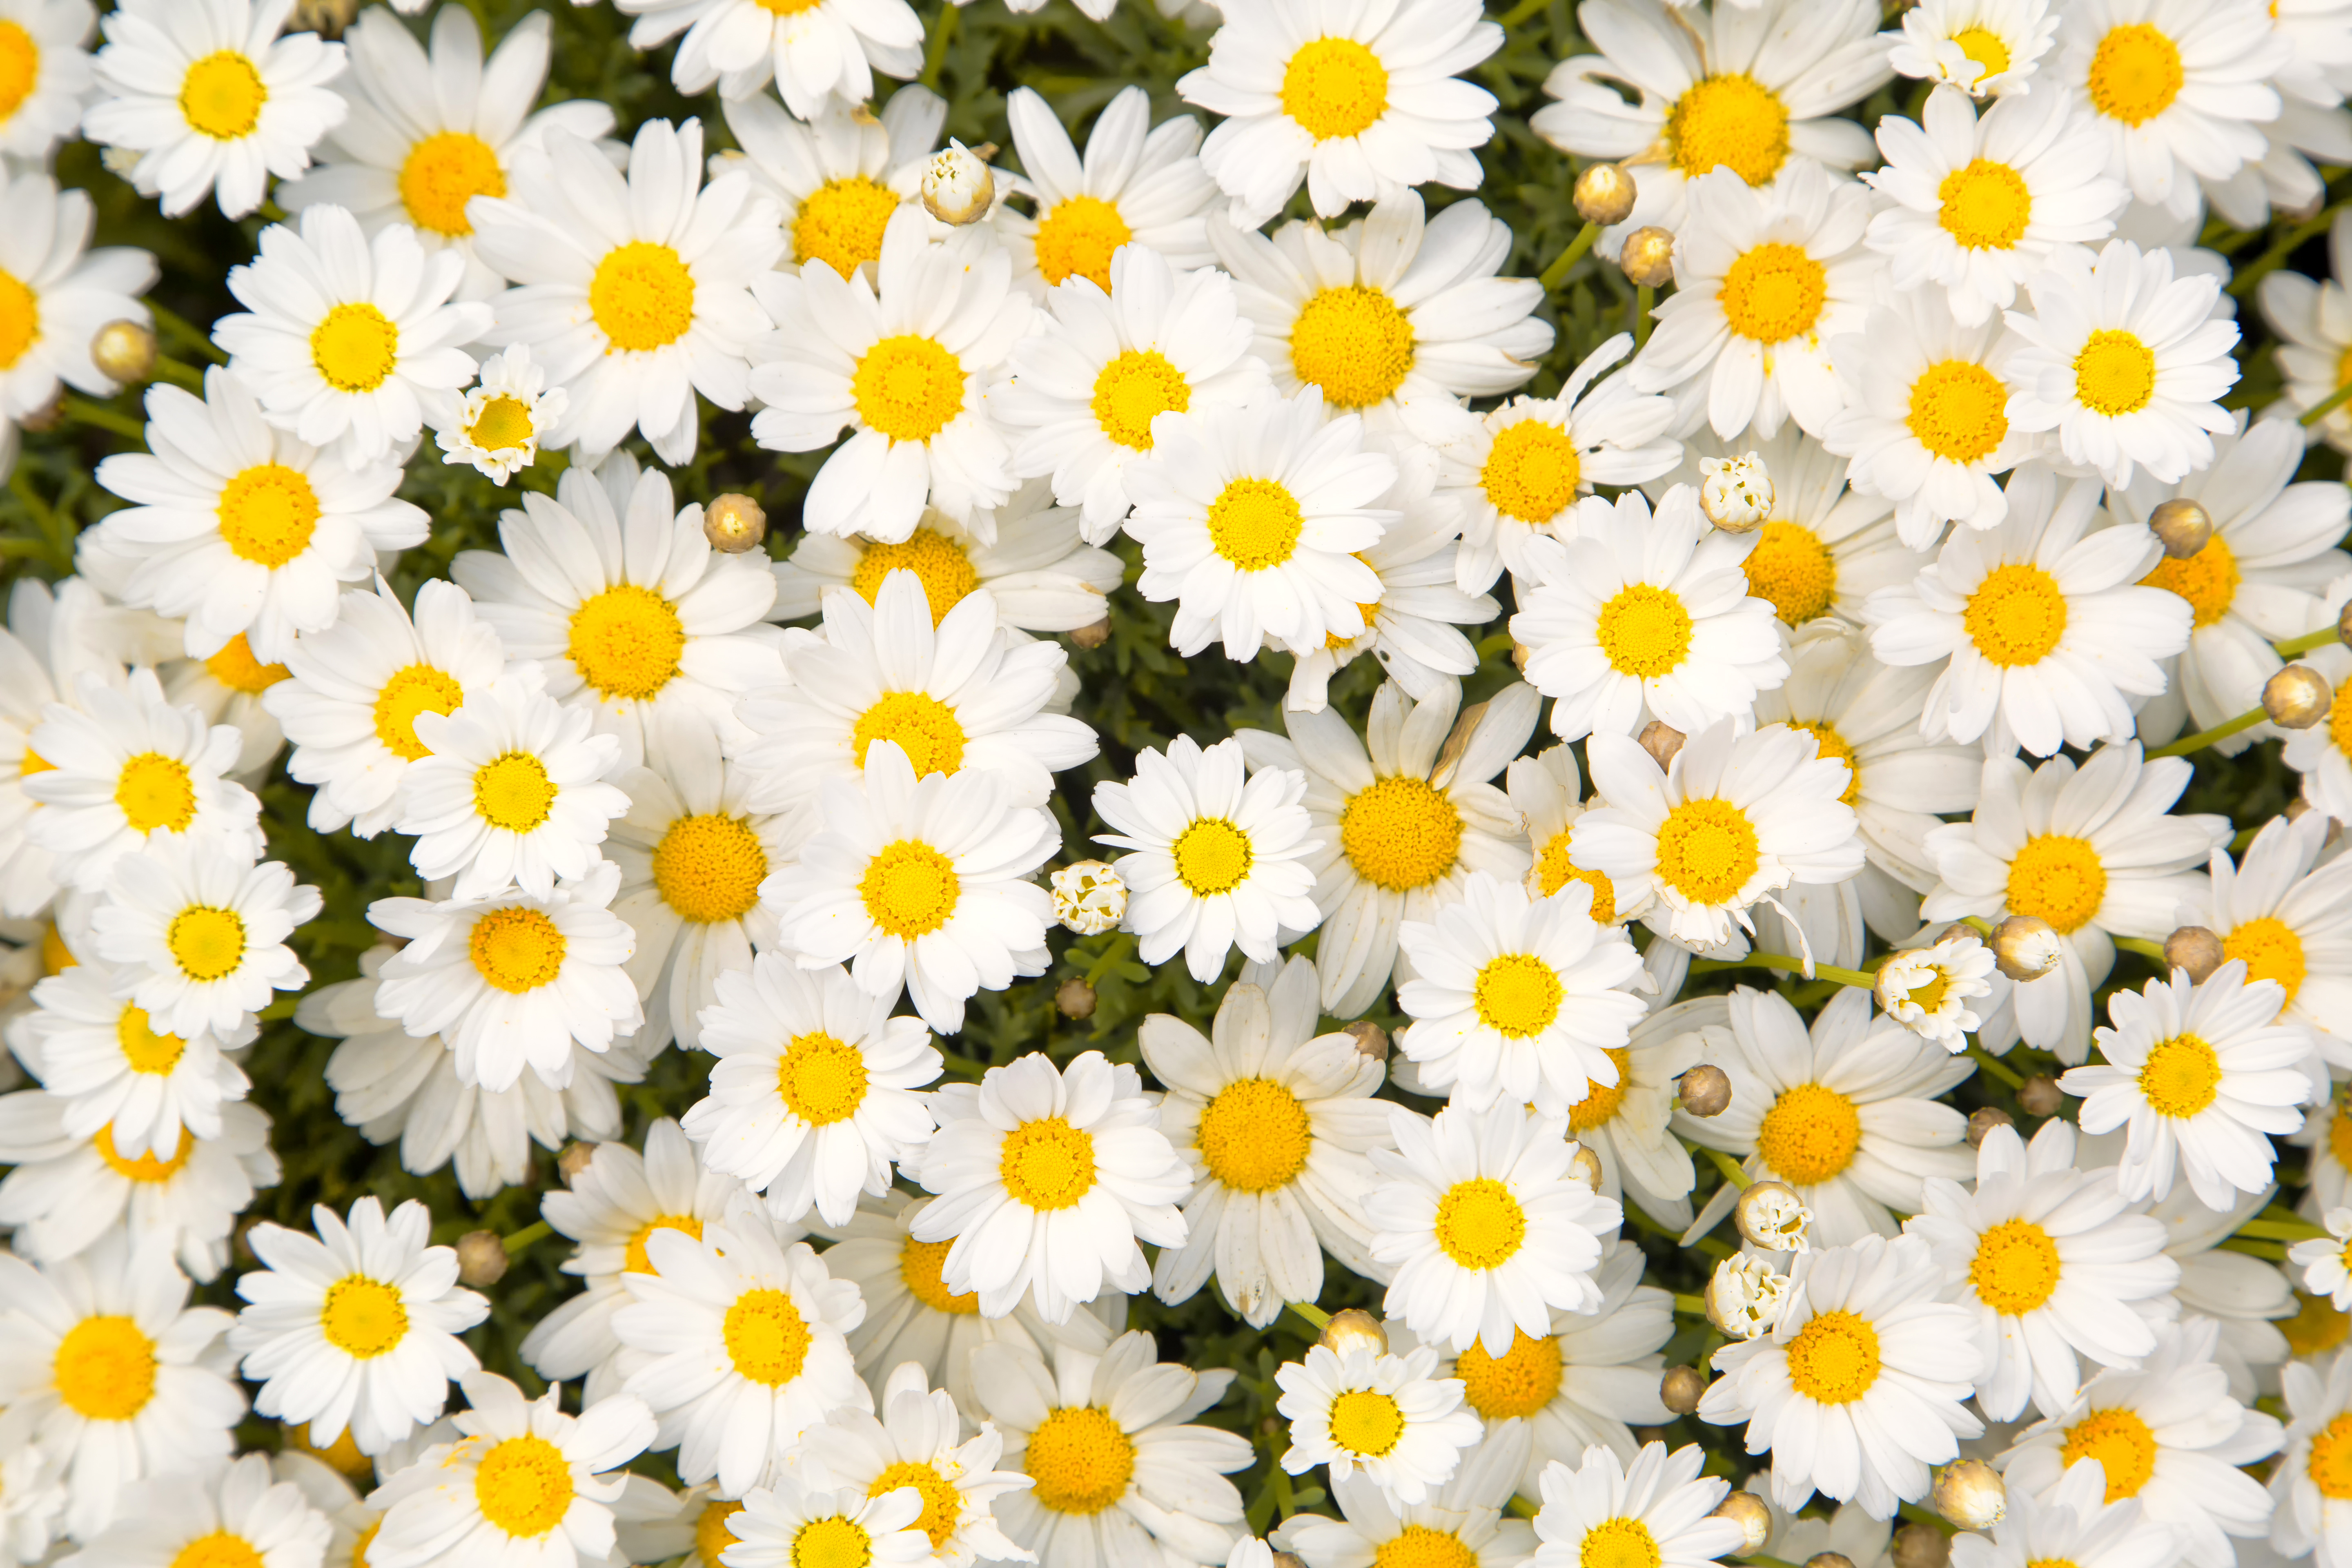 earth, camomile, close up, daisy, white flower, flowers